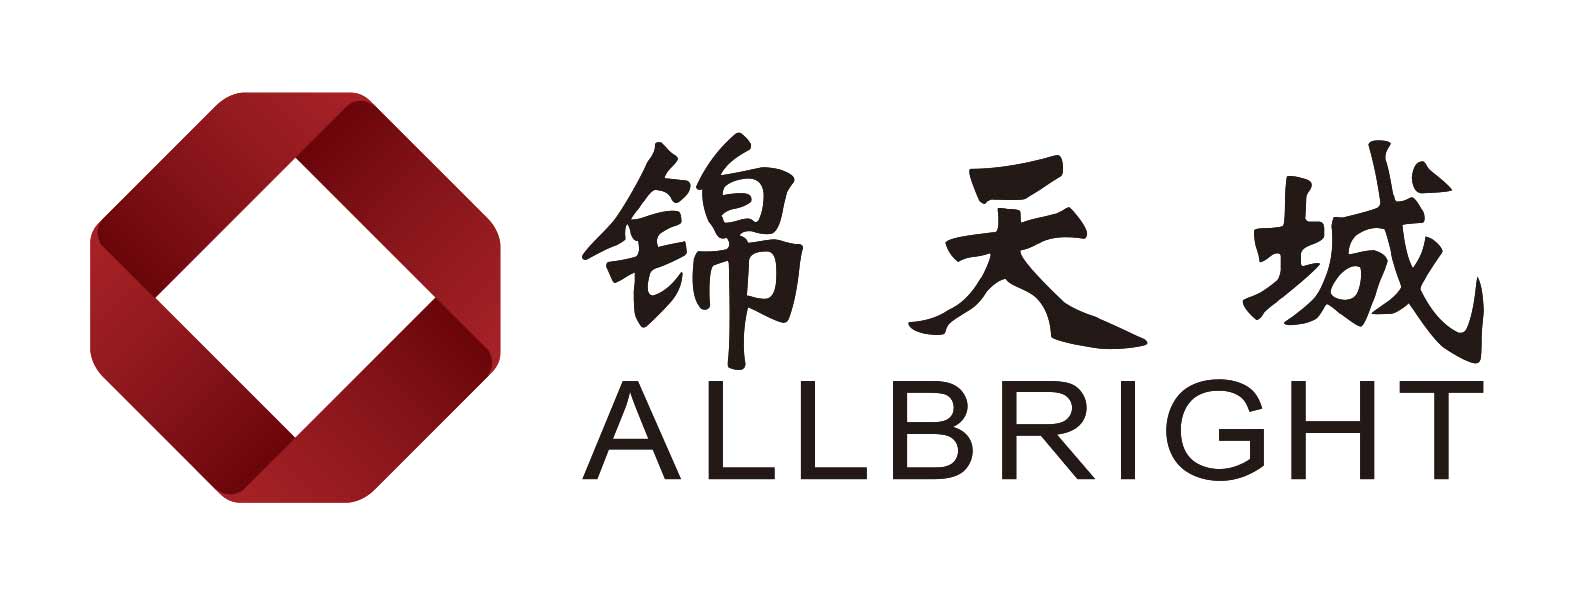 Allbright-Law-Offices 锦天城律师事务所